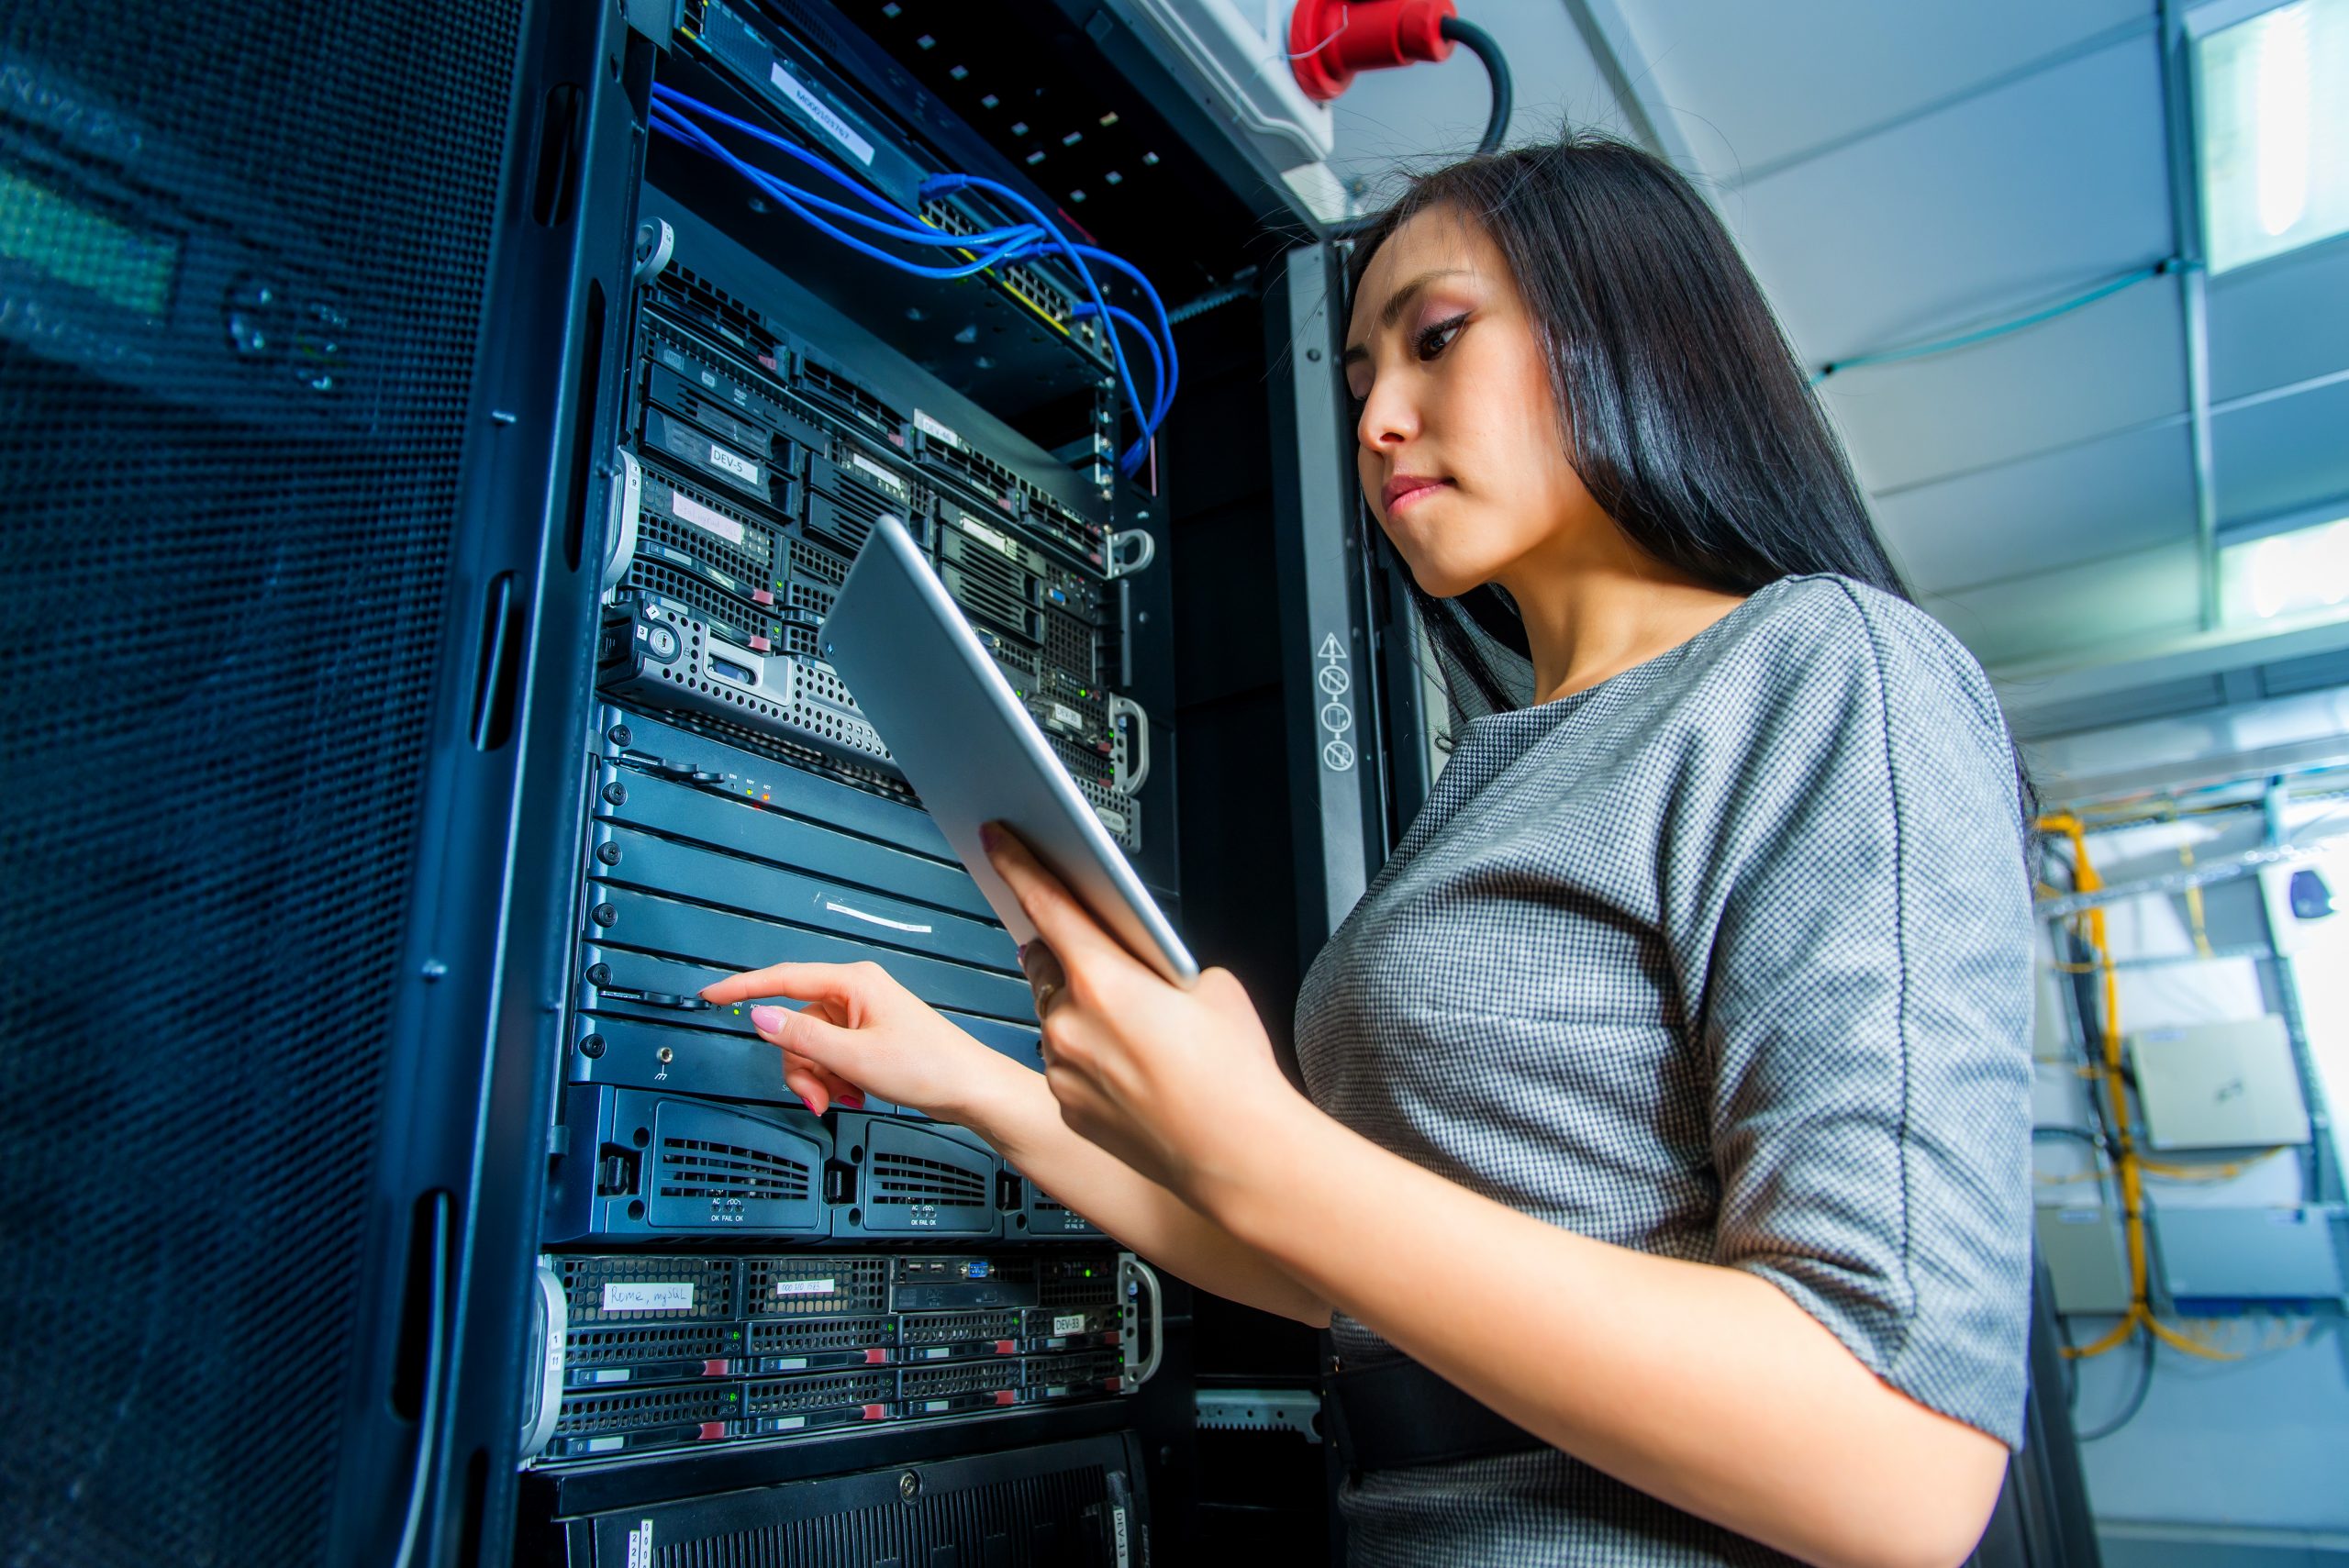 Young engineer businesswoman with tablet in network server room. Image licensed through Adobe Stock.